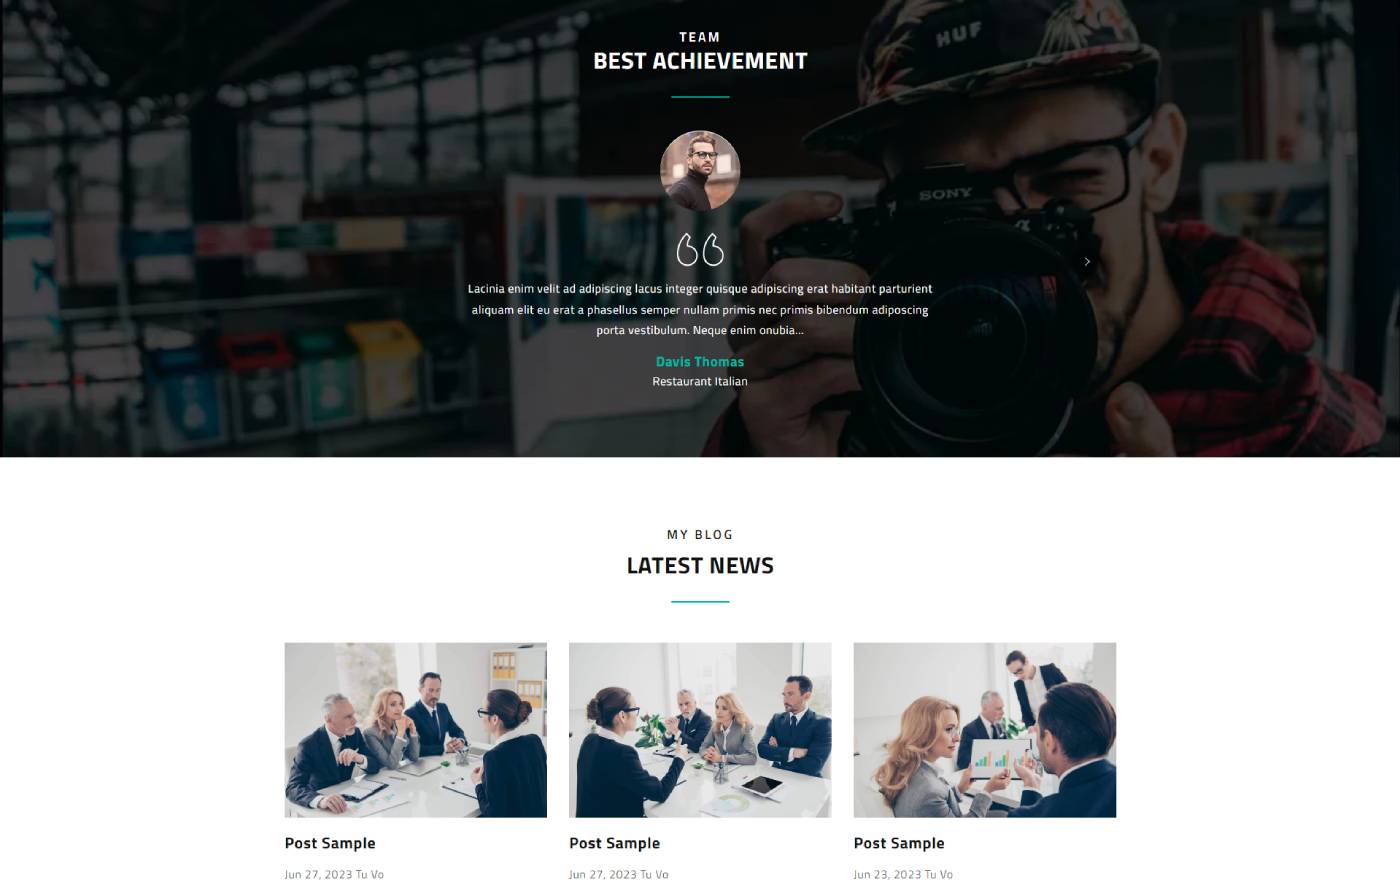 Diraxify - Digital Camera & lenses Store Shopify template built by Pagefly